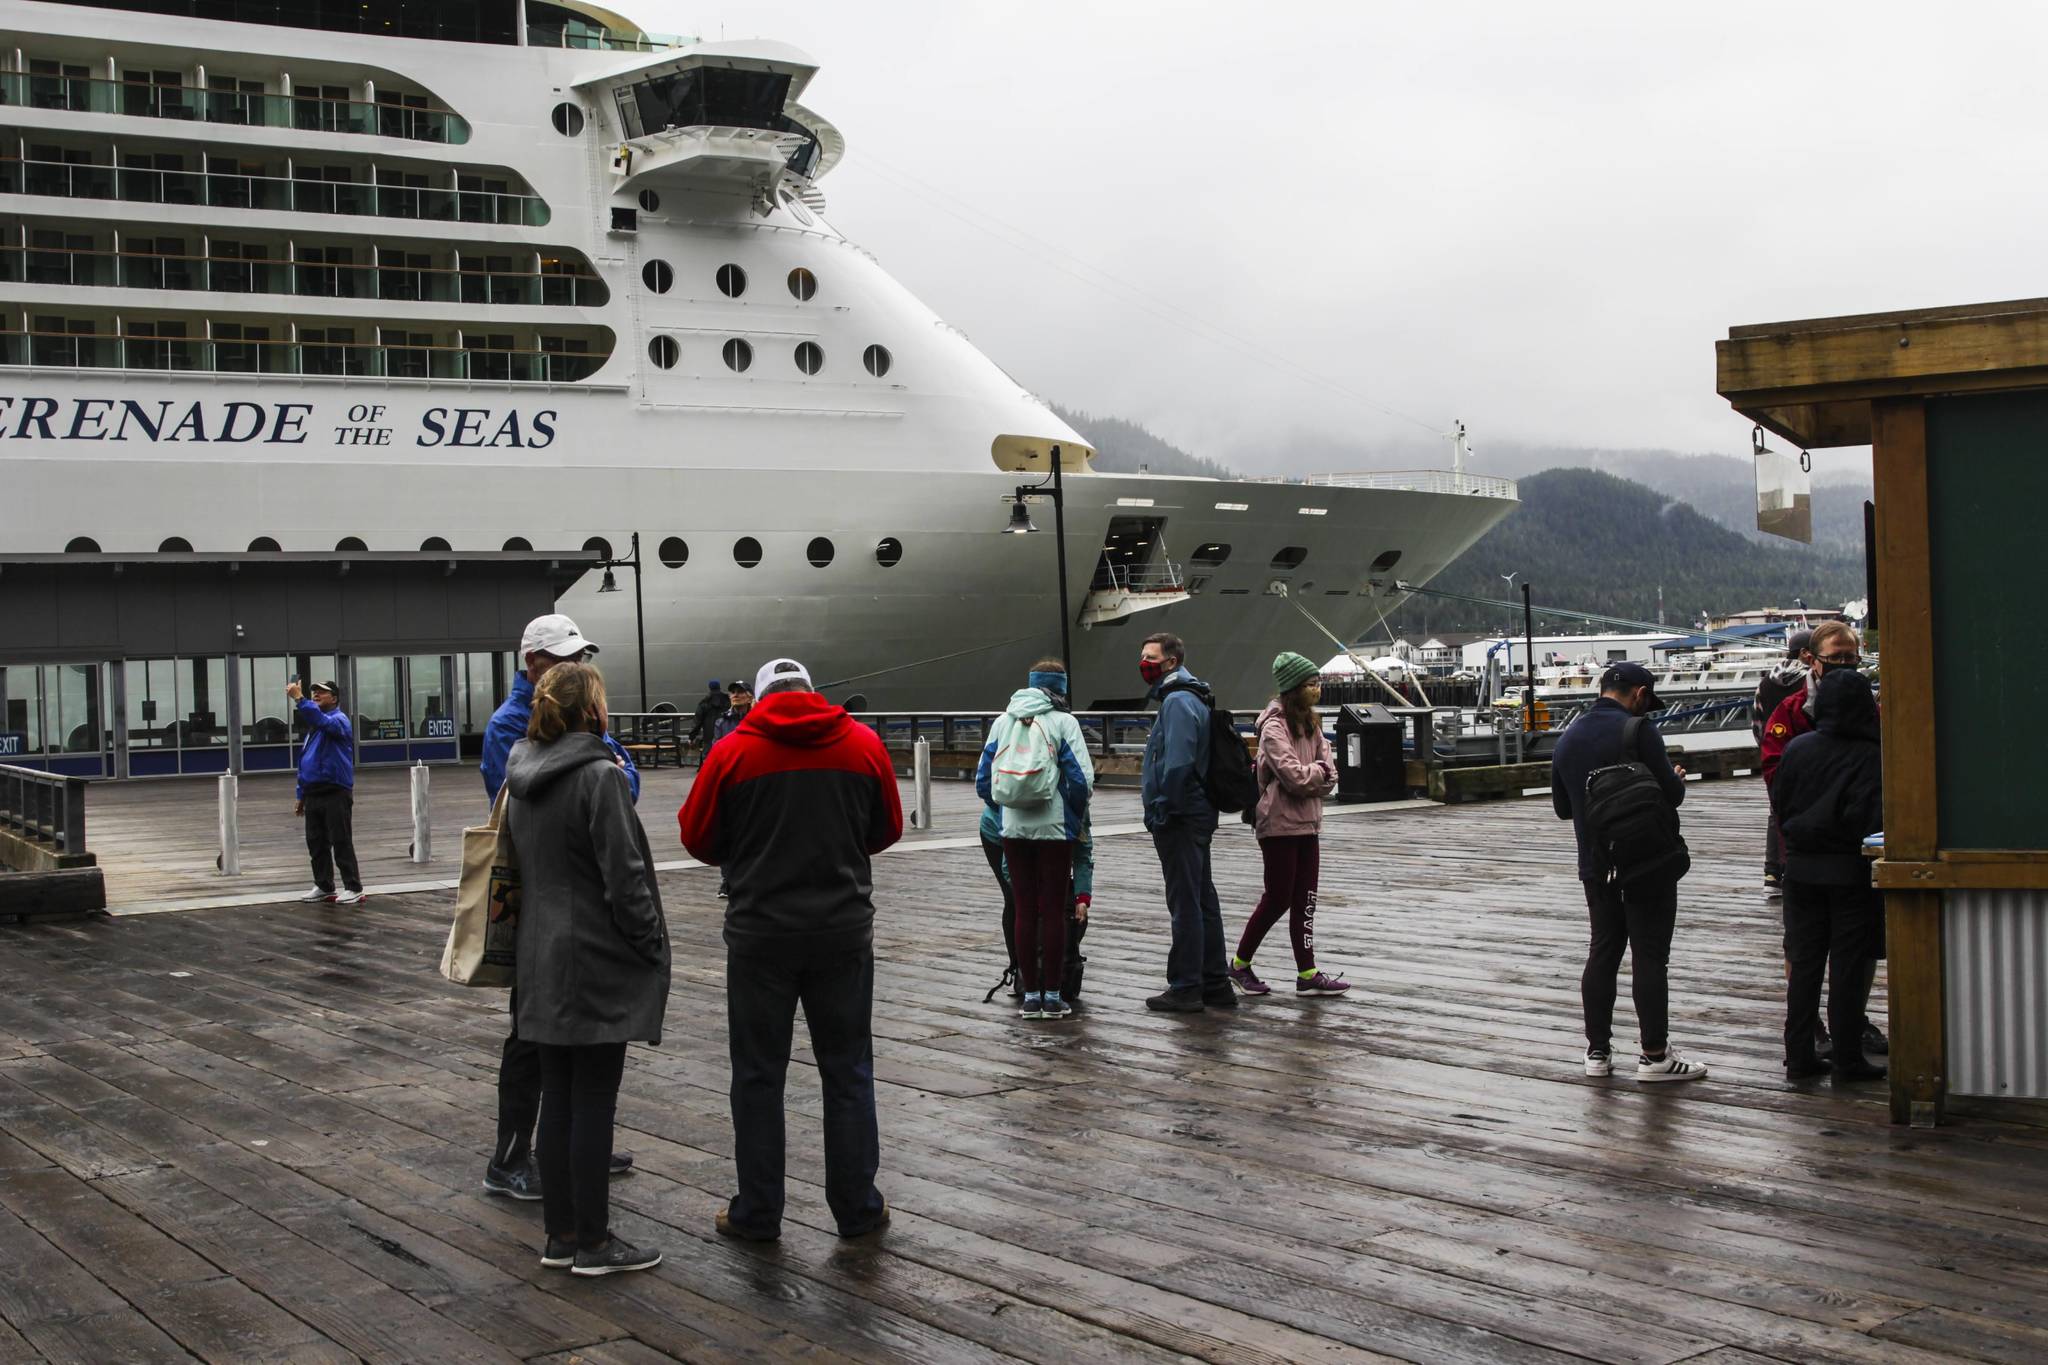 Tourists mill near the Serenade of the Seas, the first large cruise ship to come to Juneau in 2021, on Friday, July 23. (Michael S. Lockett / Juneau Empire)